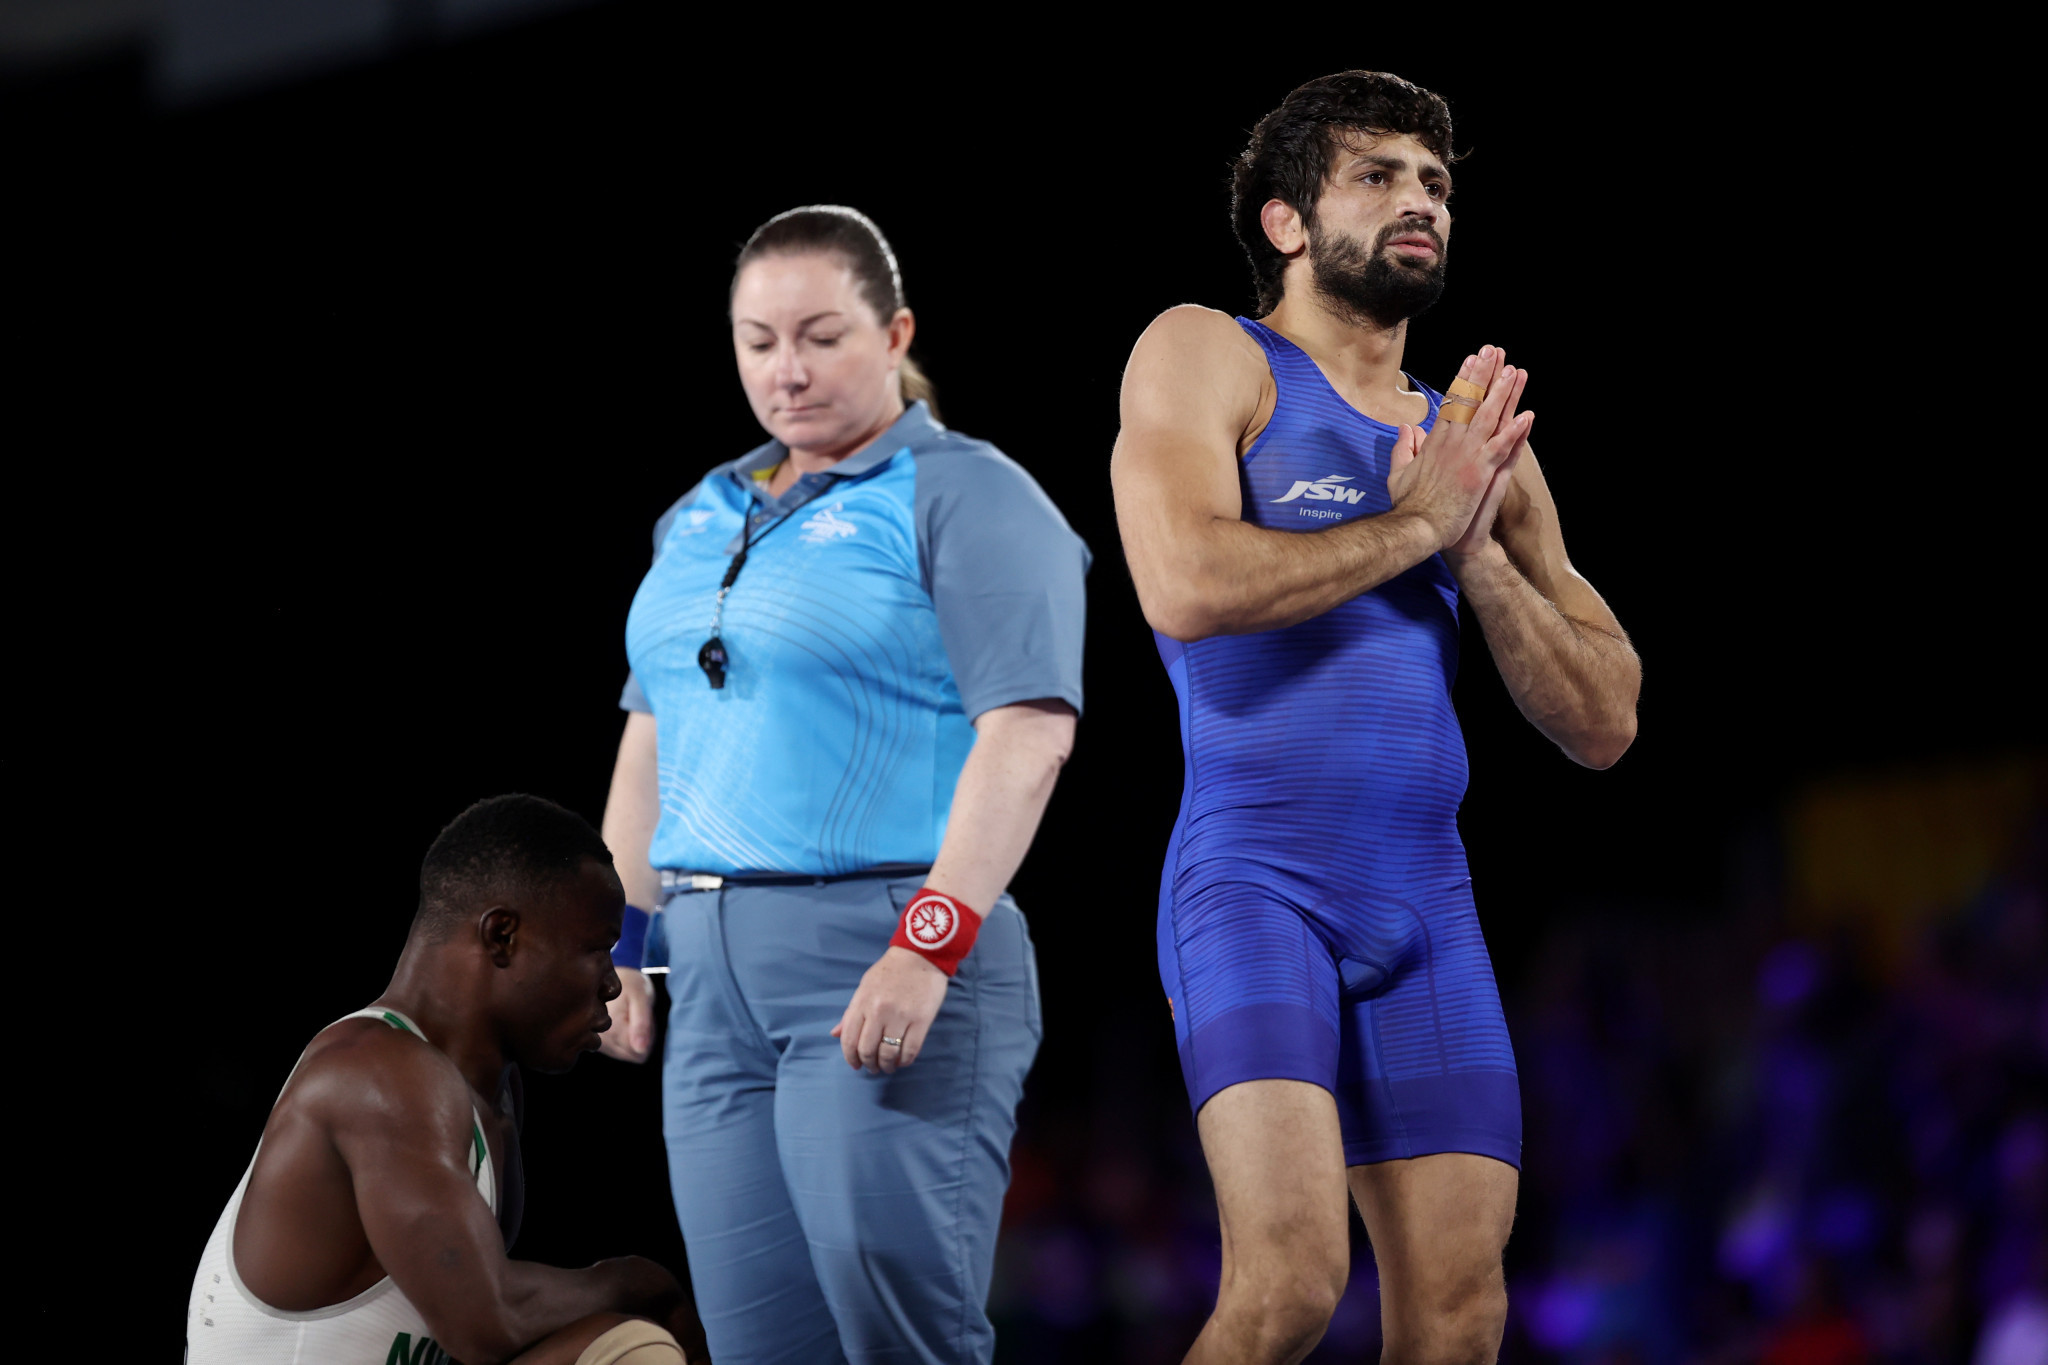 Ravi Kumar Dahiya will not be competing at the UWW Asian Championships due to an injury ©Getty Images